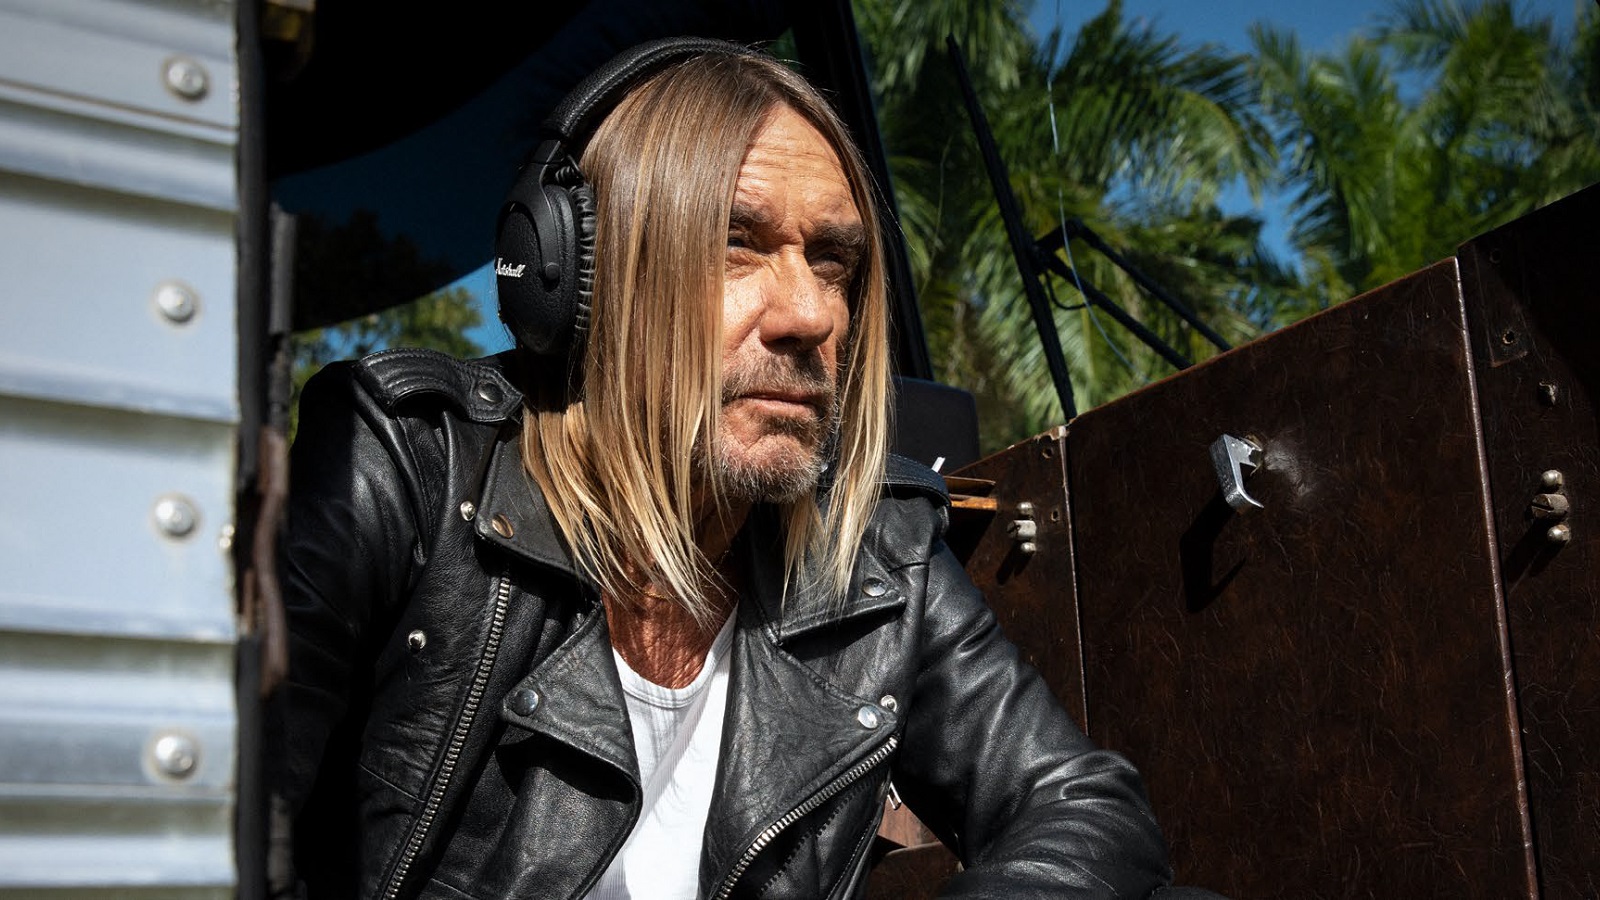 Iggy Pop Highlights the Importance of Listening